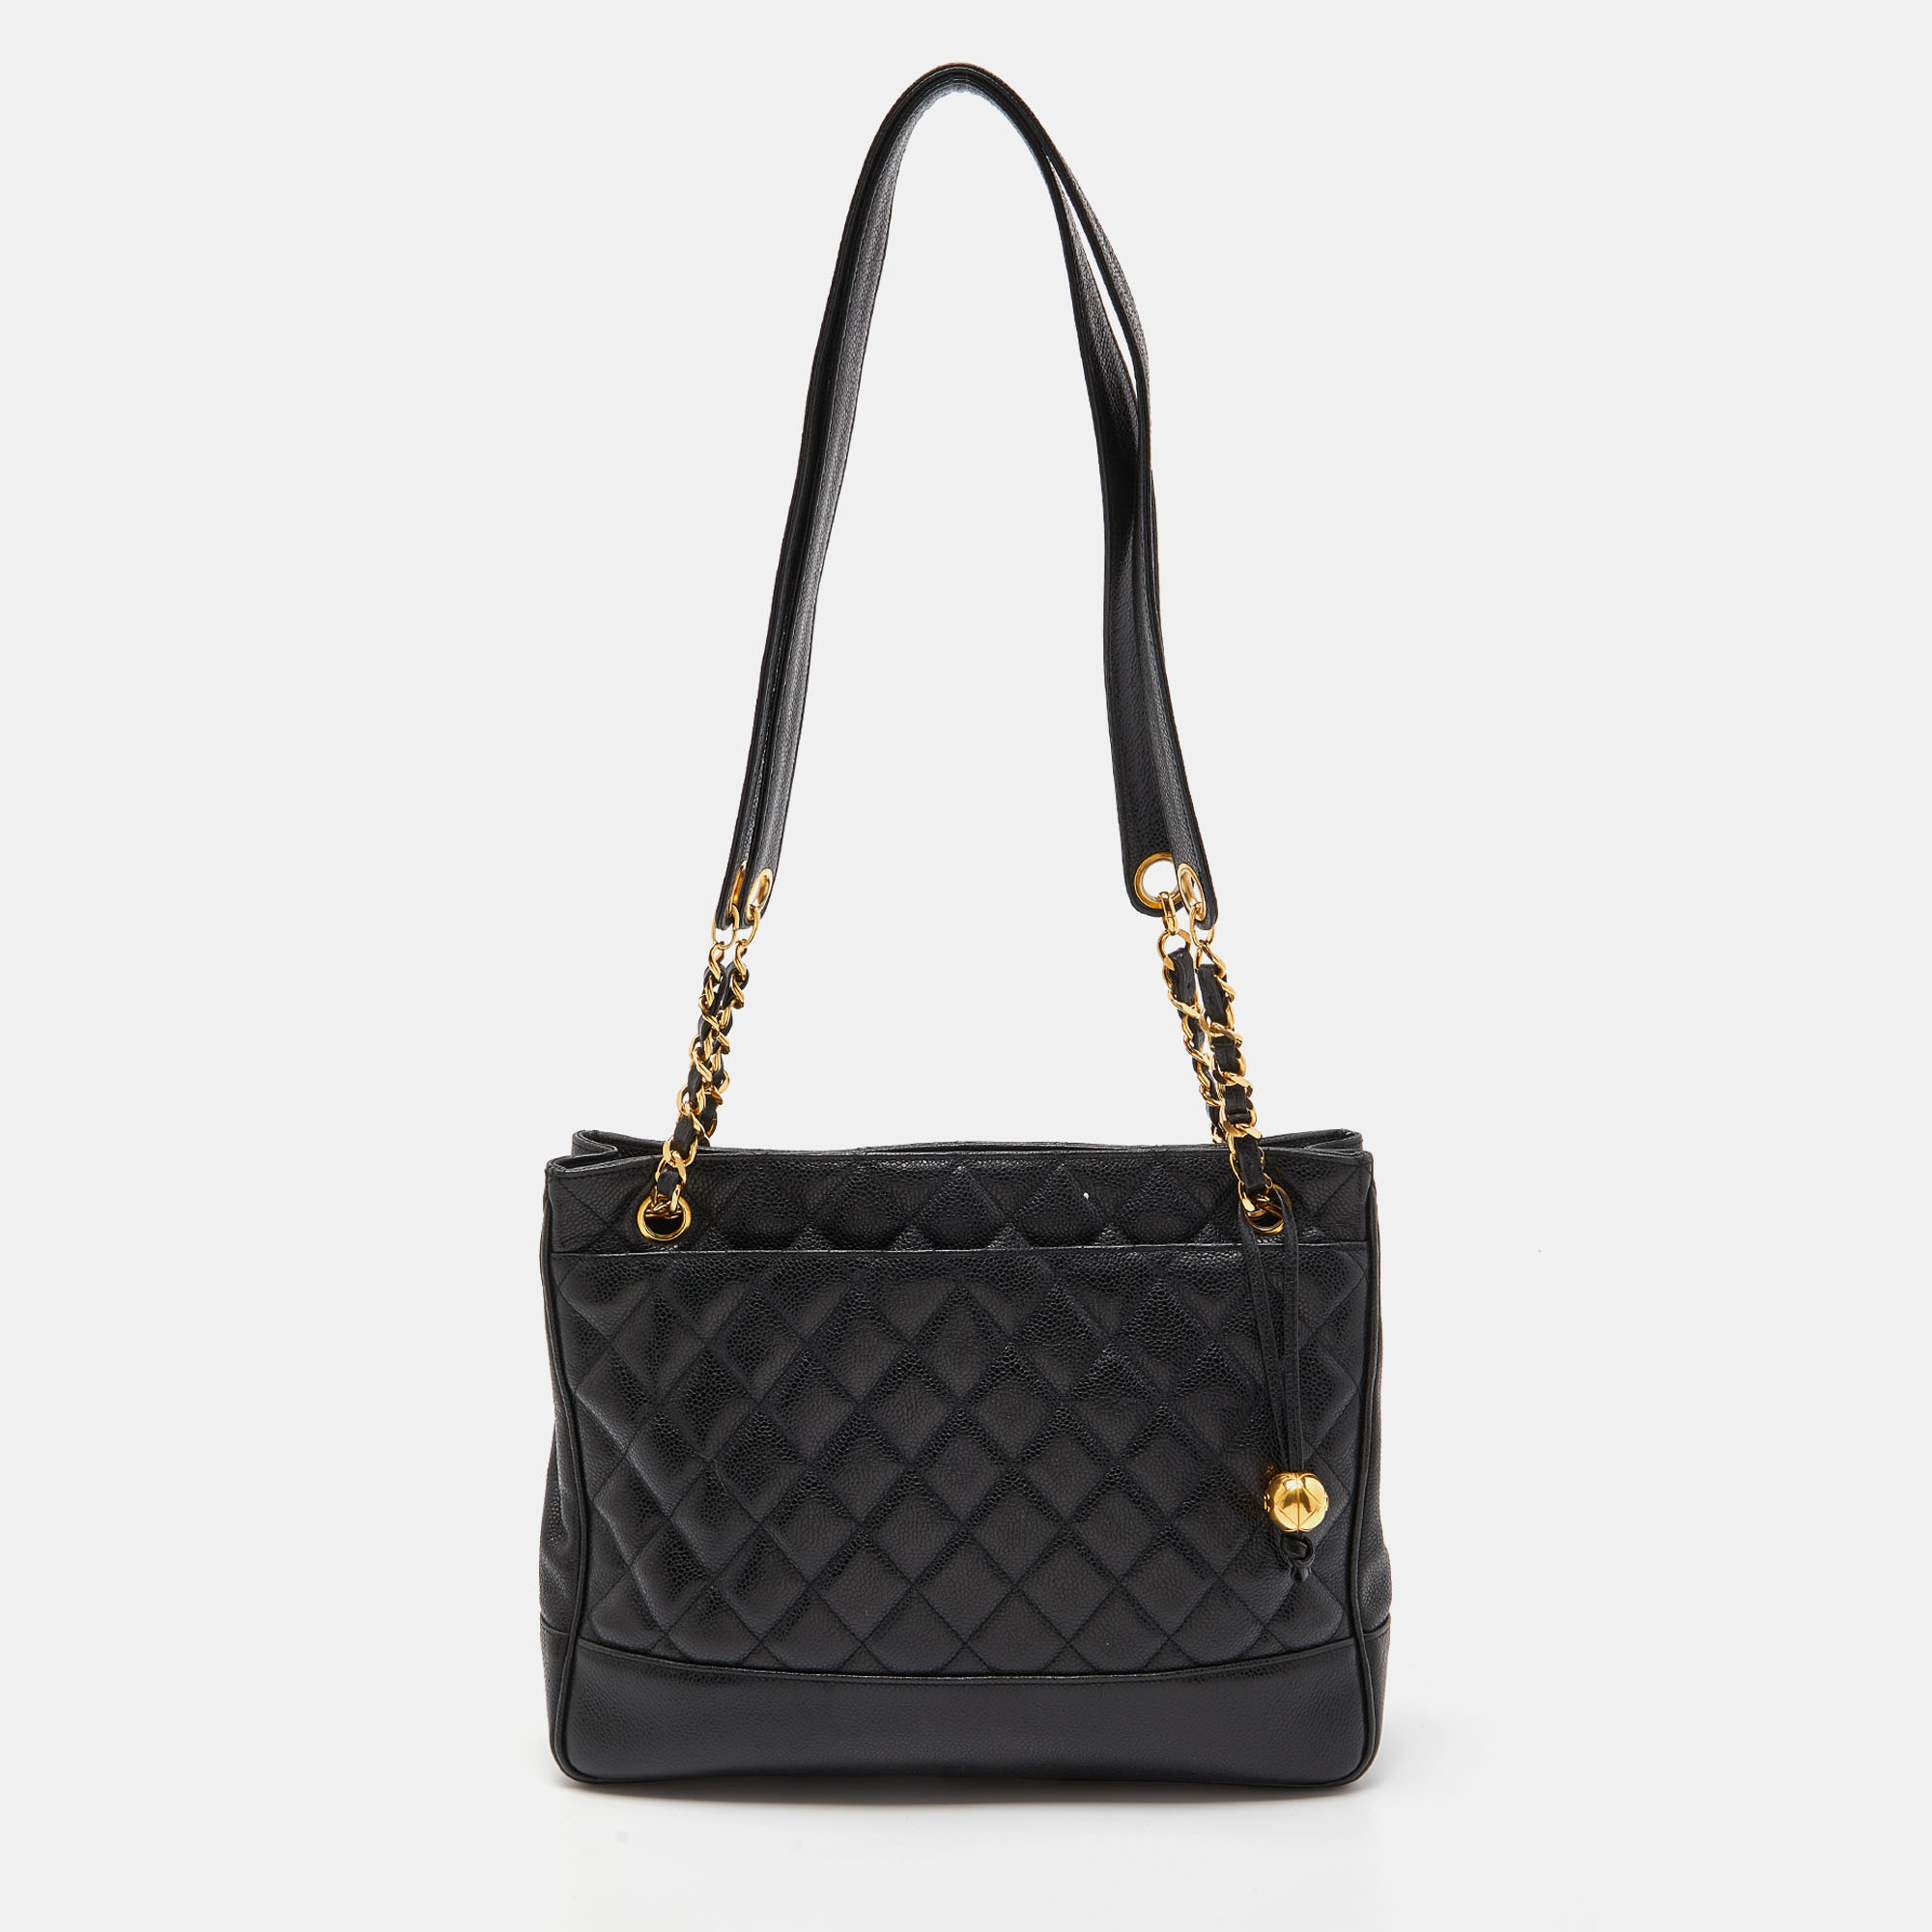 Chanel black quilted caviar leather vintage shopper tote